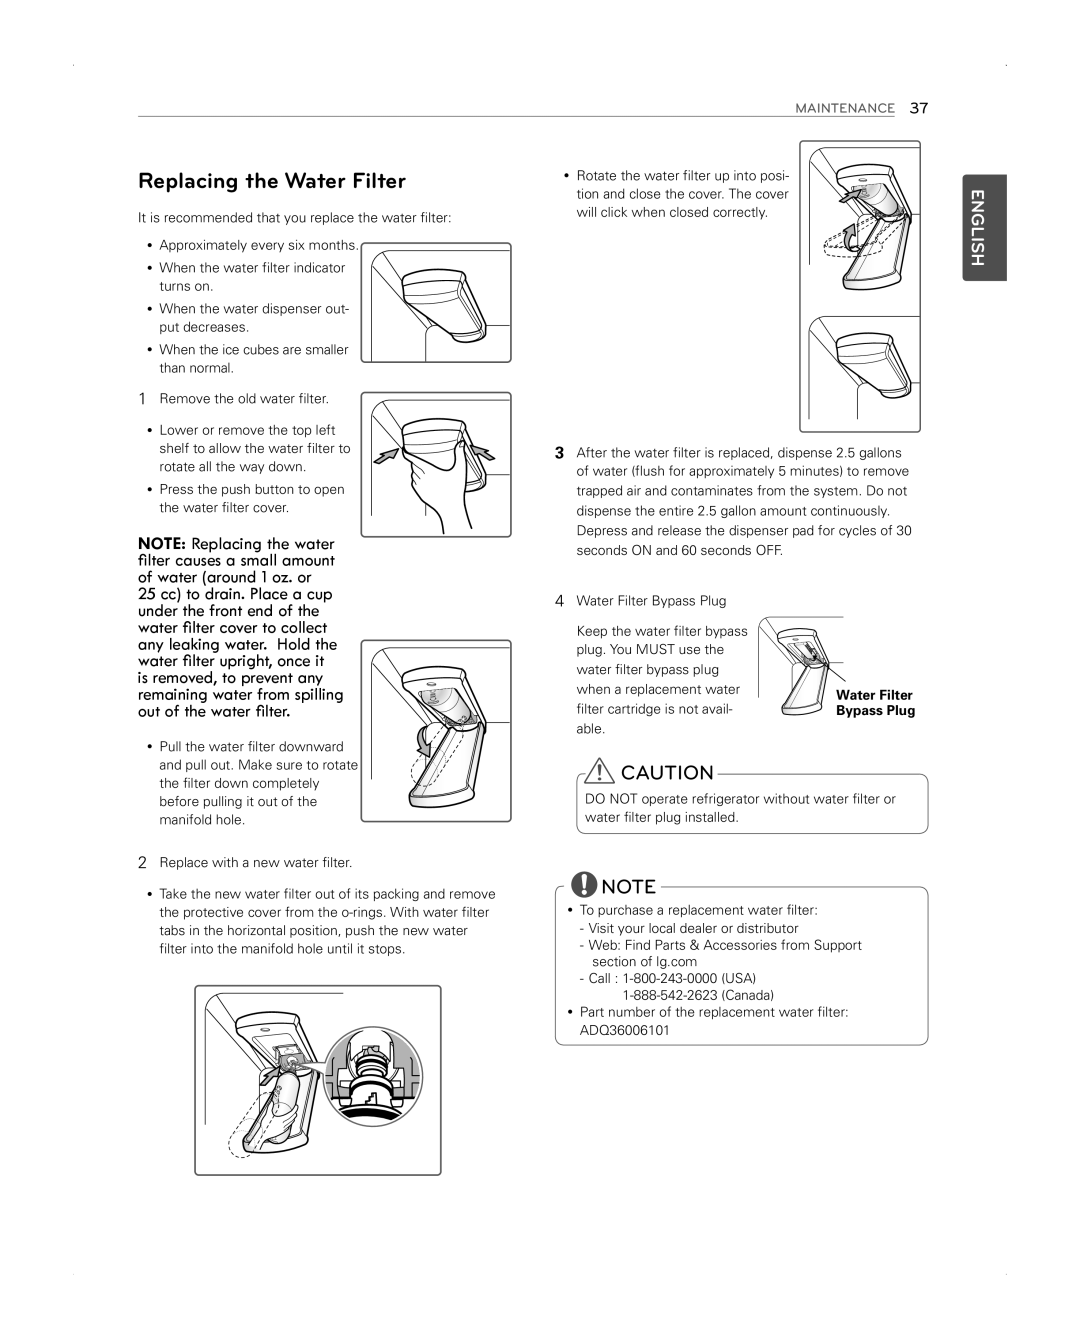 LG Electronics LFX31945ST owner manual Replacing the Water Filter, English, Maintenance, Water Filter Bypass Plug 